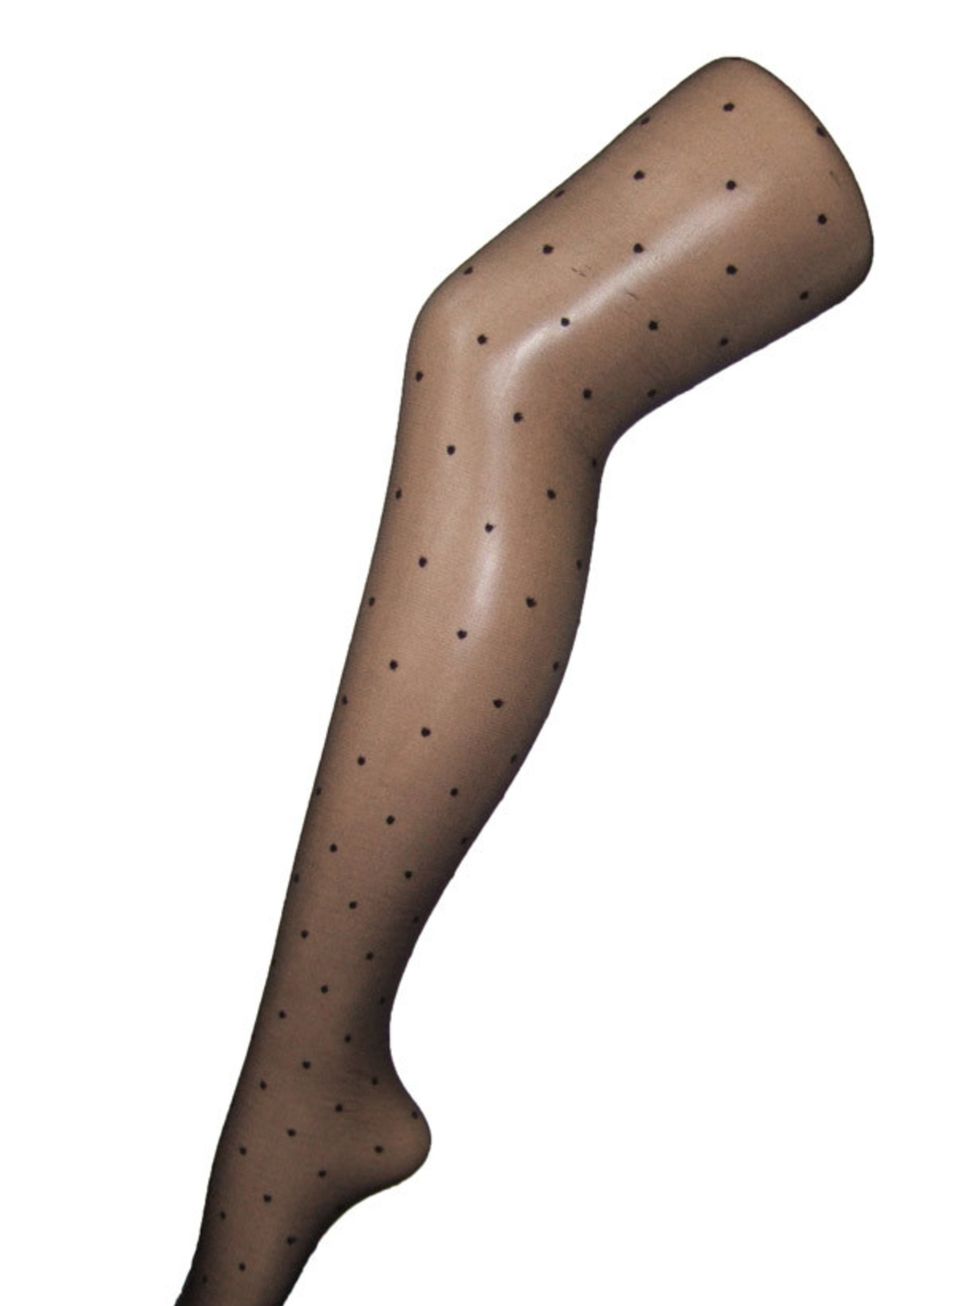 <p>Spotty Tights, £5.49, by Charnos at <a href="http://www.tightsplease.co.uk/brands/charnos/sheer-mini-spot-tights/">tightsplease.co.uk</a></p>